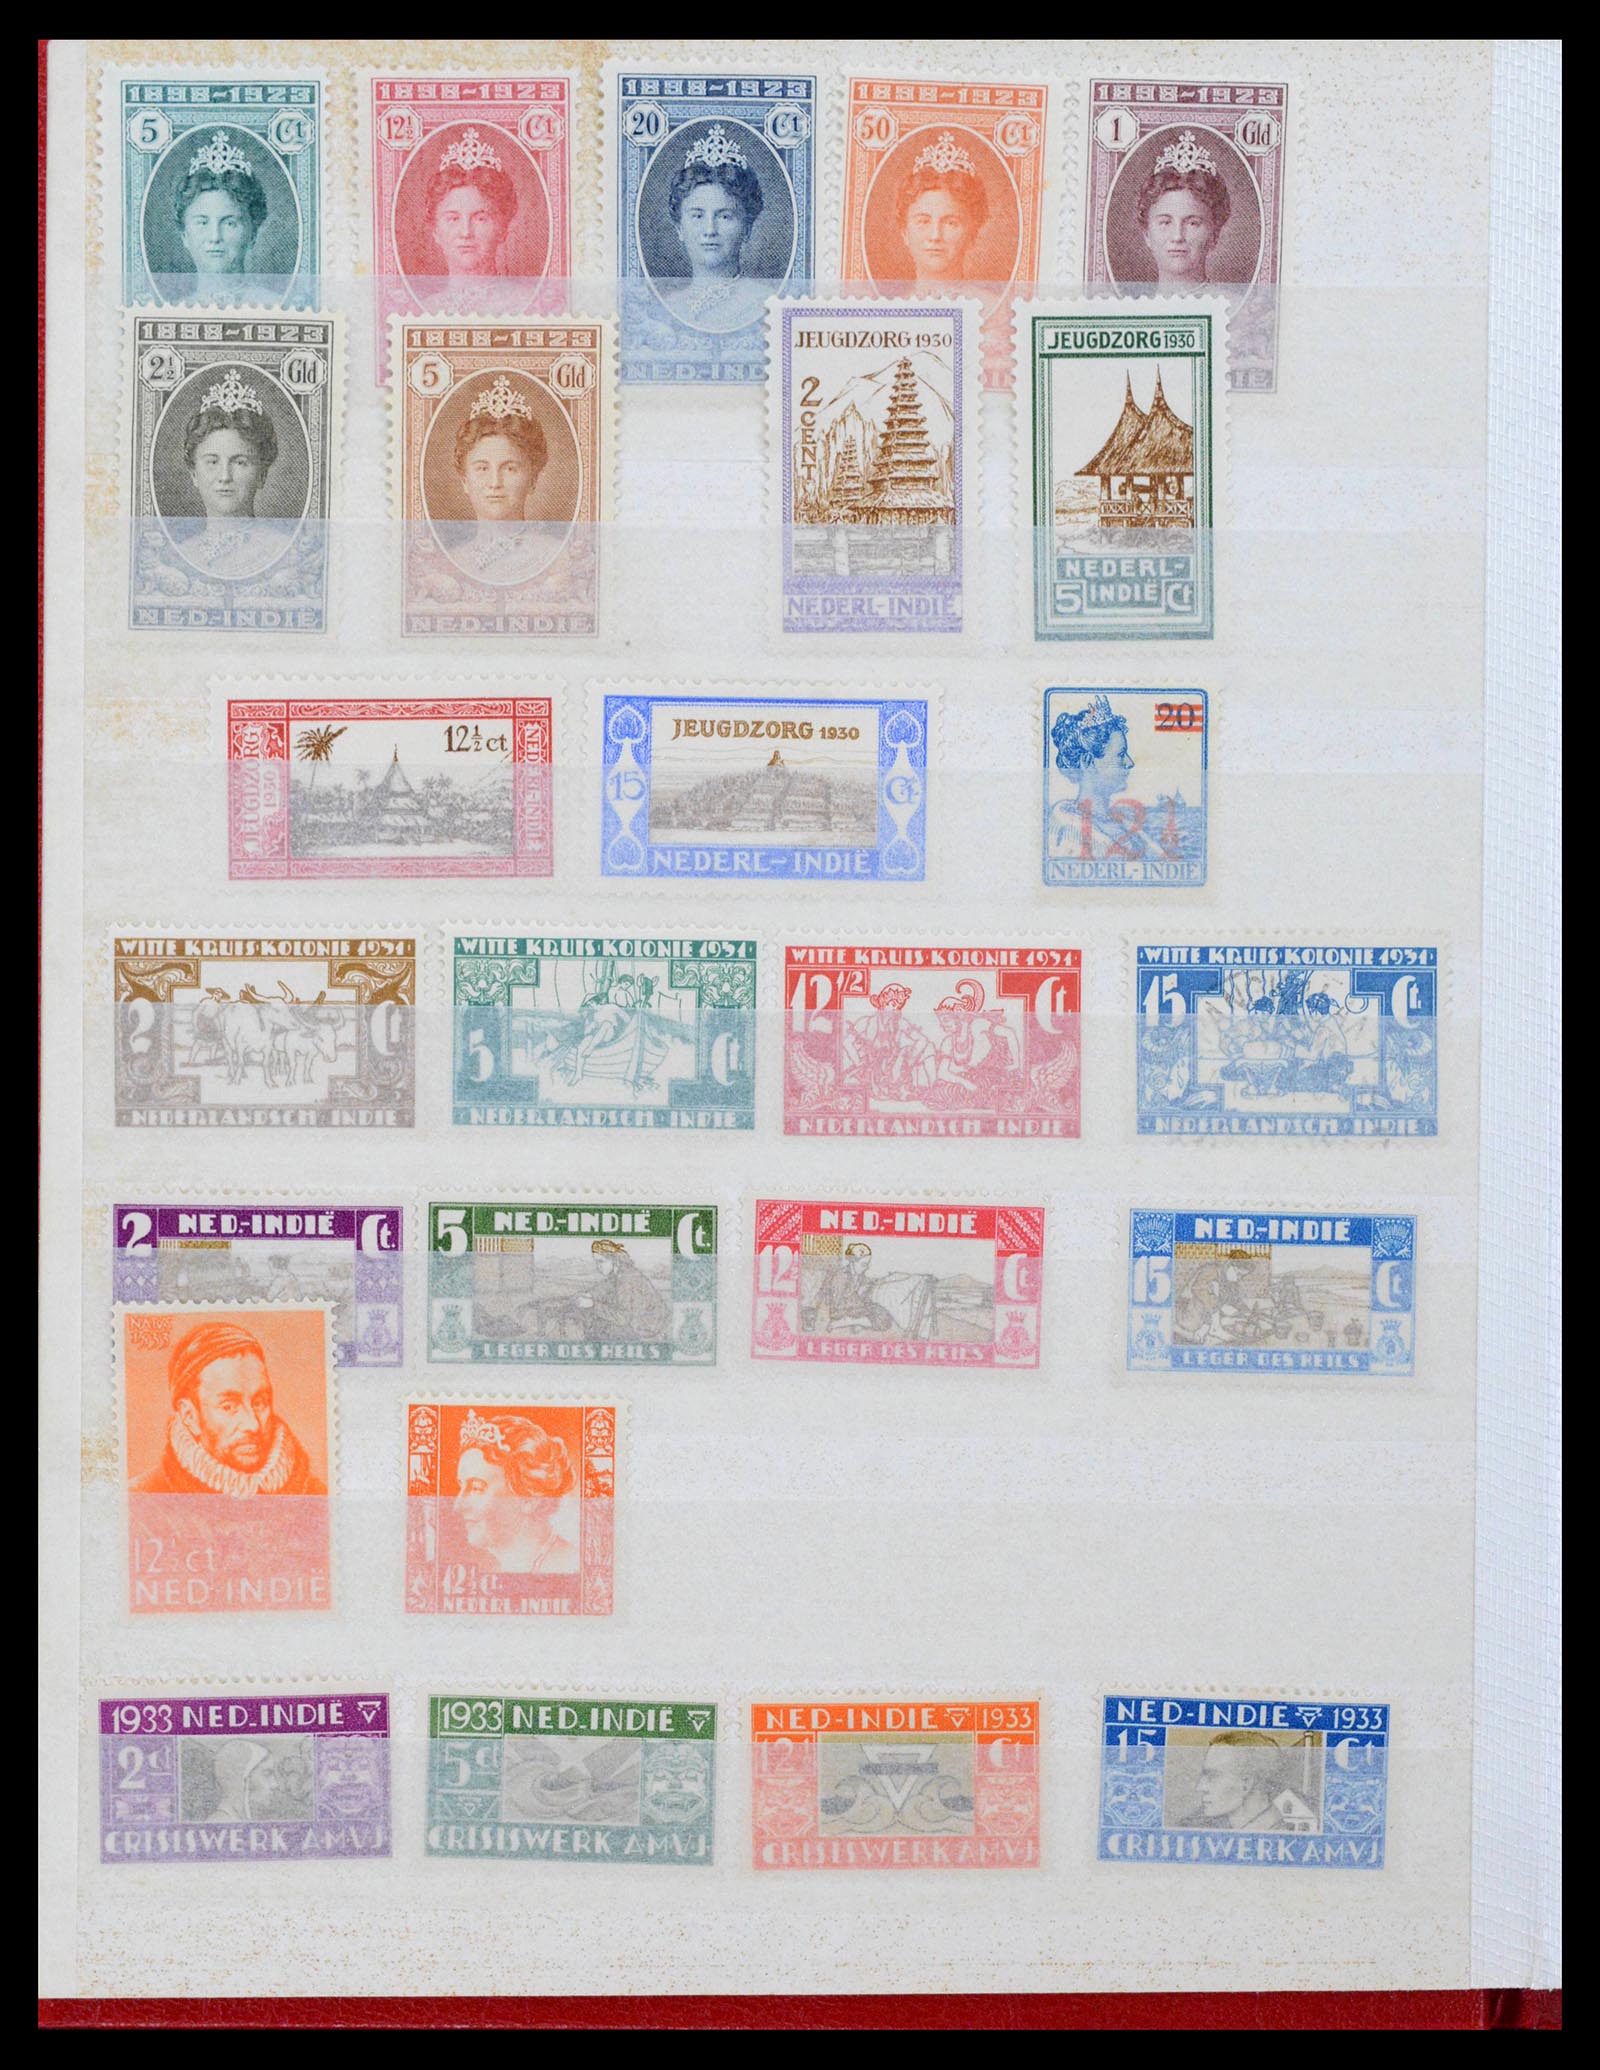 39359 0006 - Stamp collection 39359 Dutch east Indies 1864-1948.